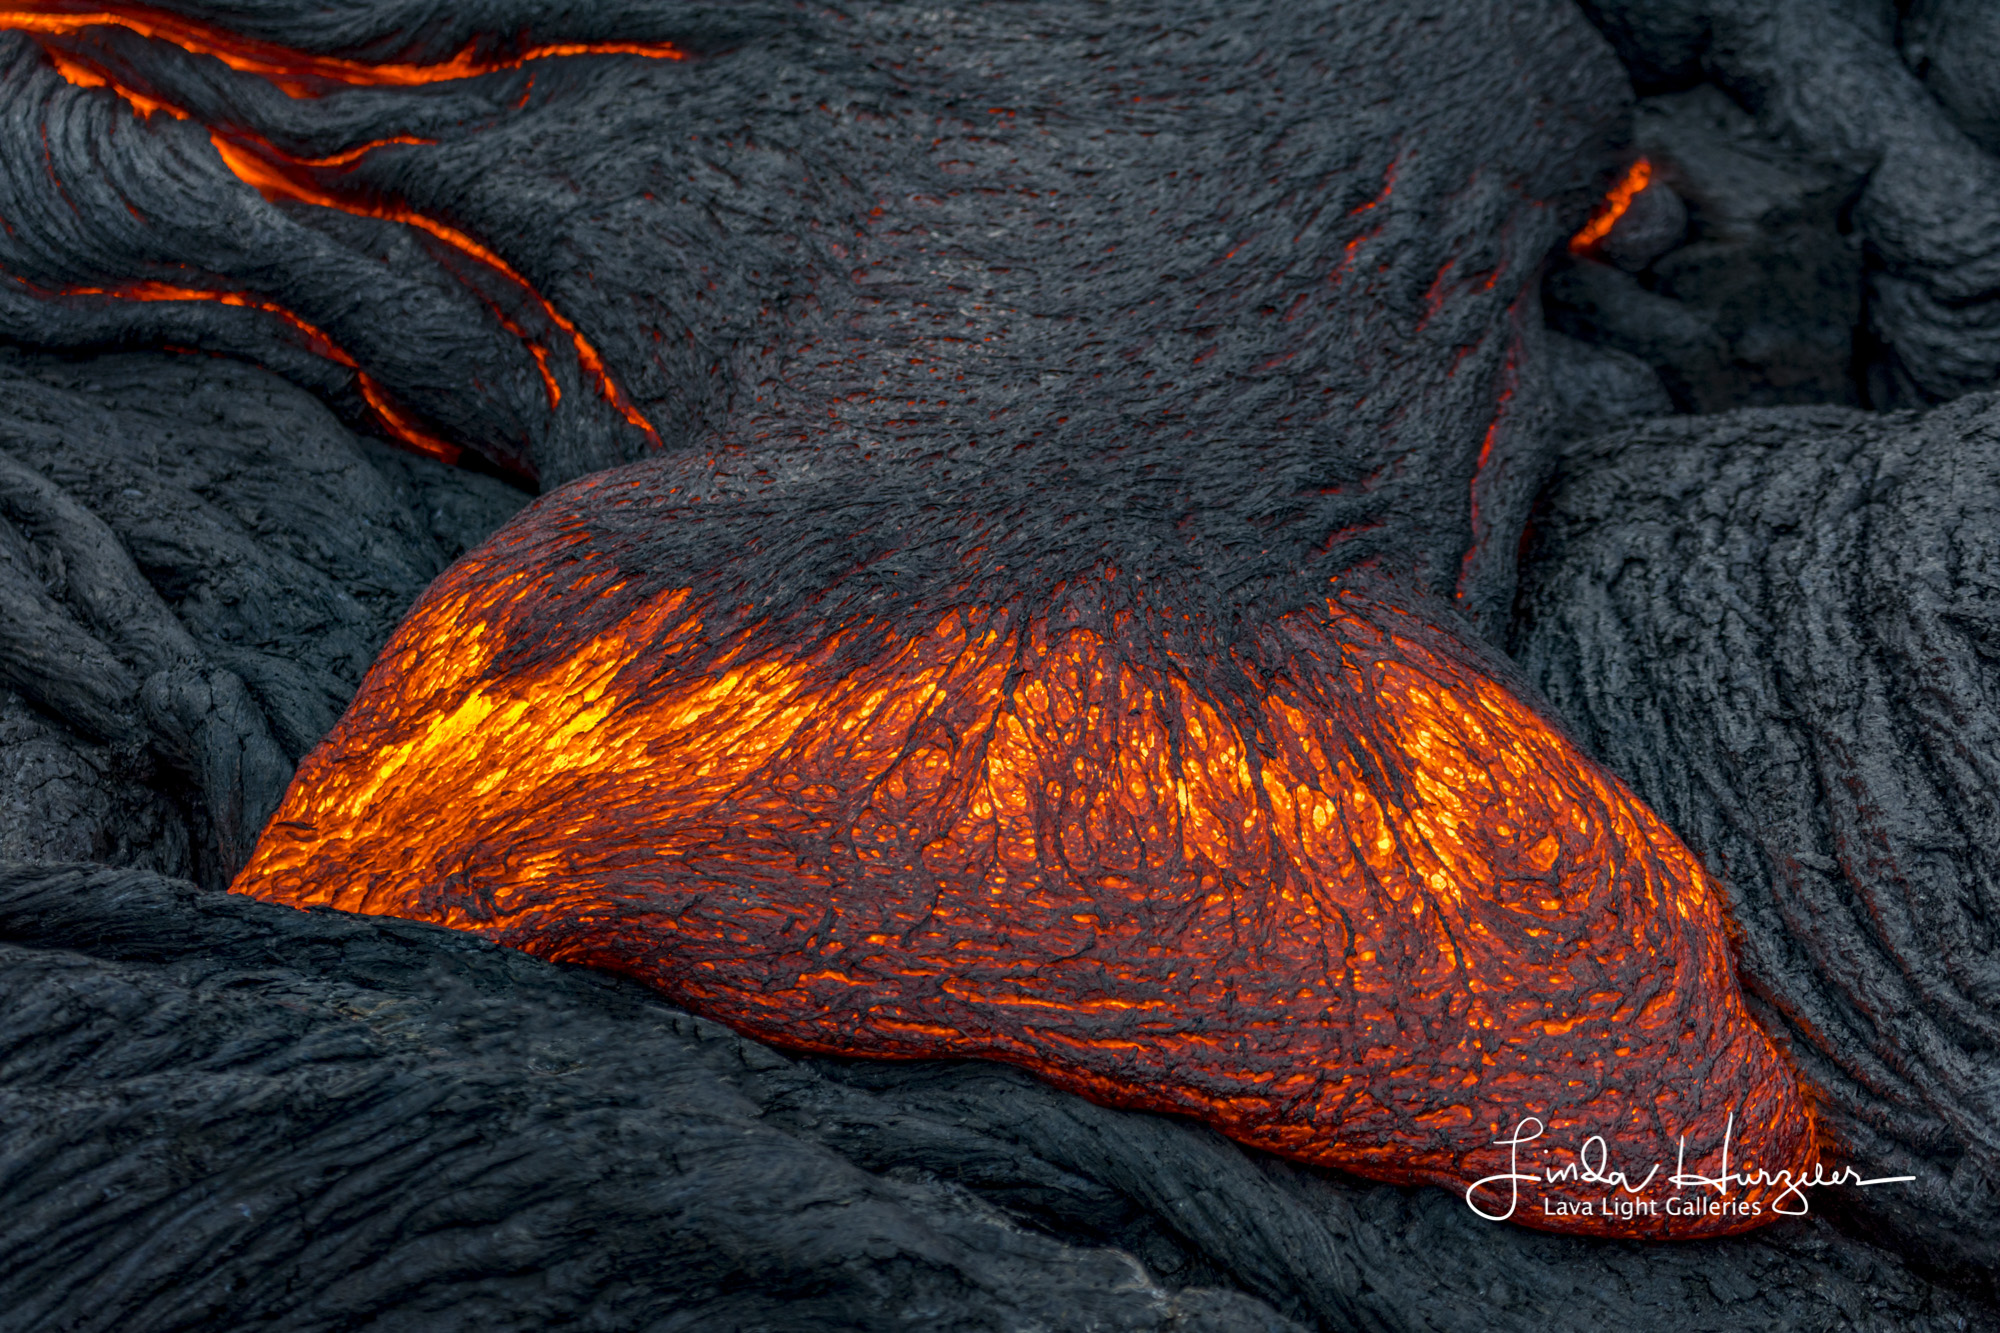 All kinds of shapes seen on the lava field...including this mermaid tail.